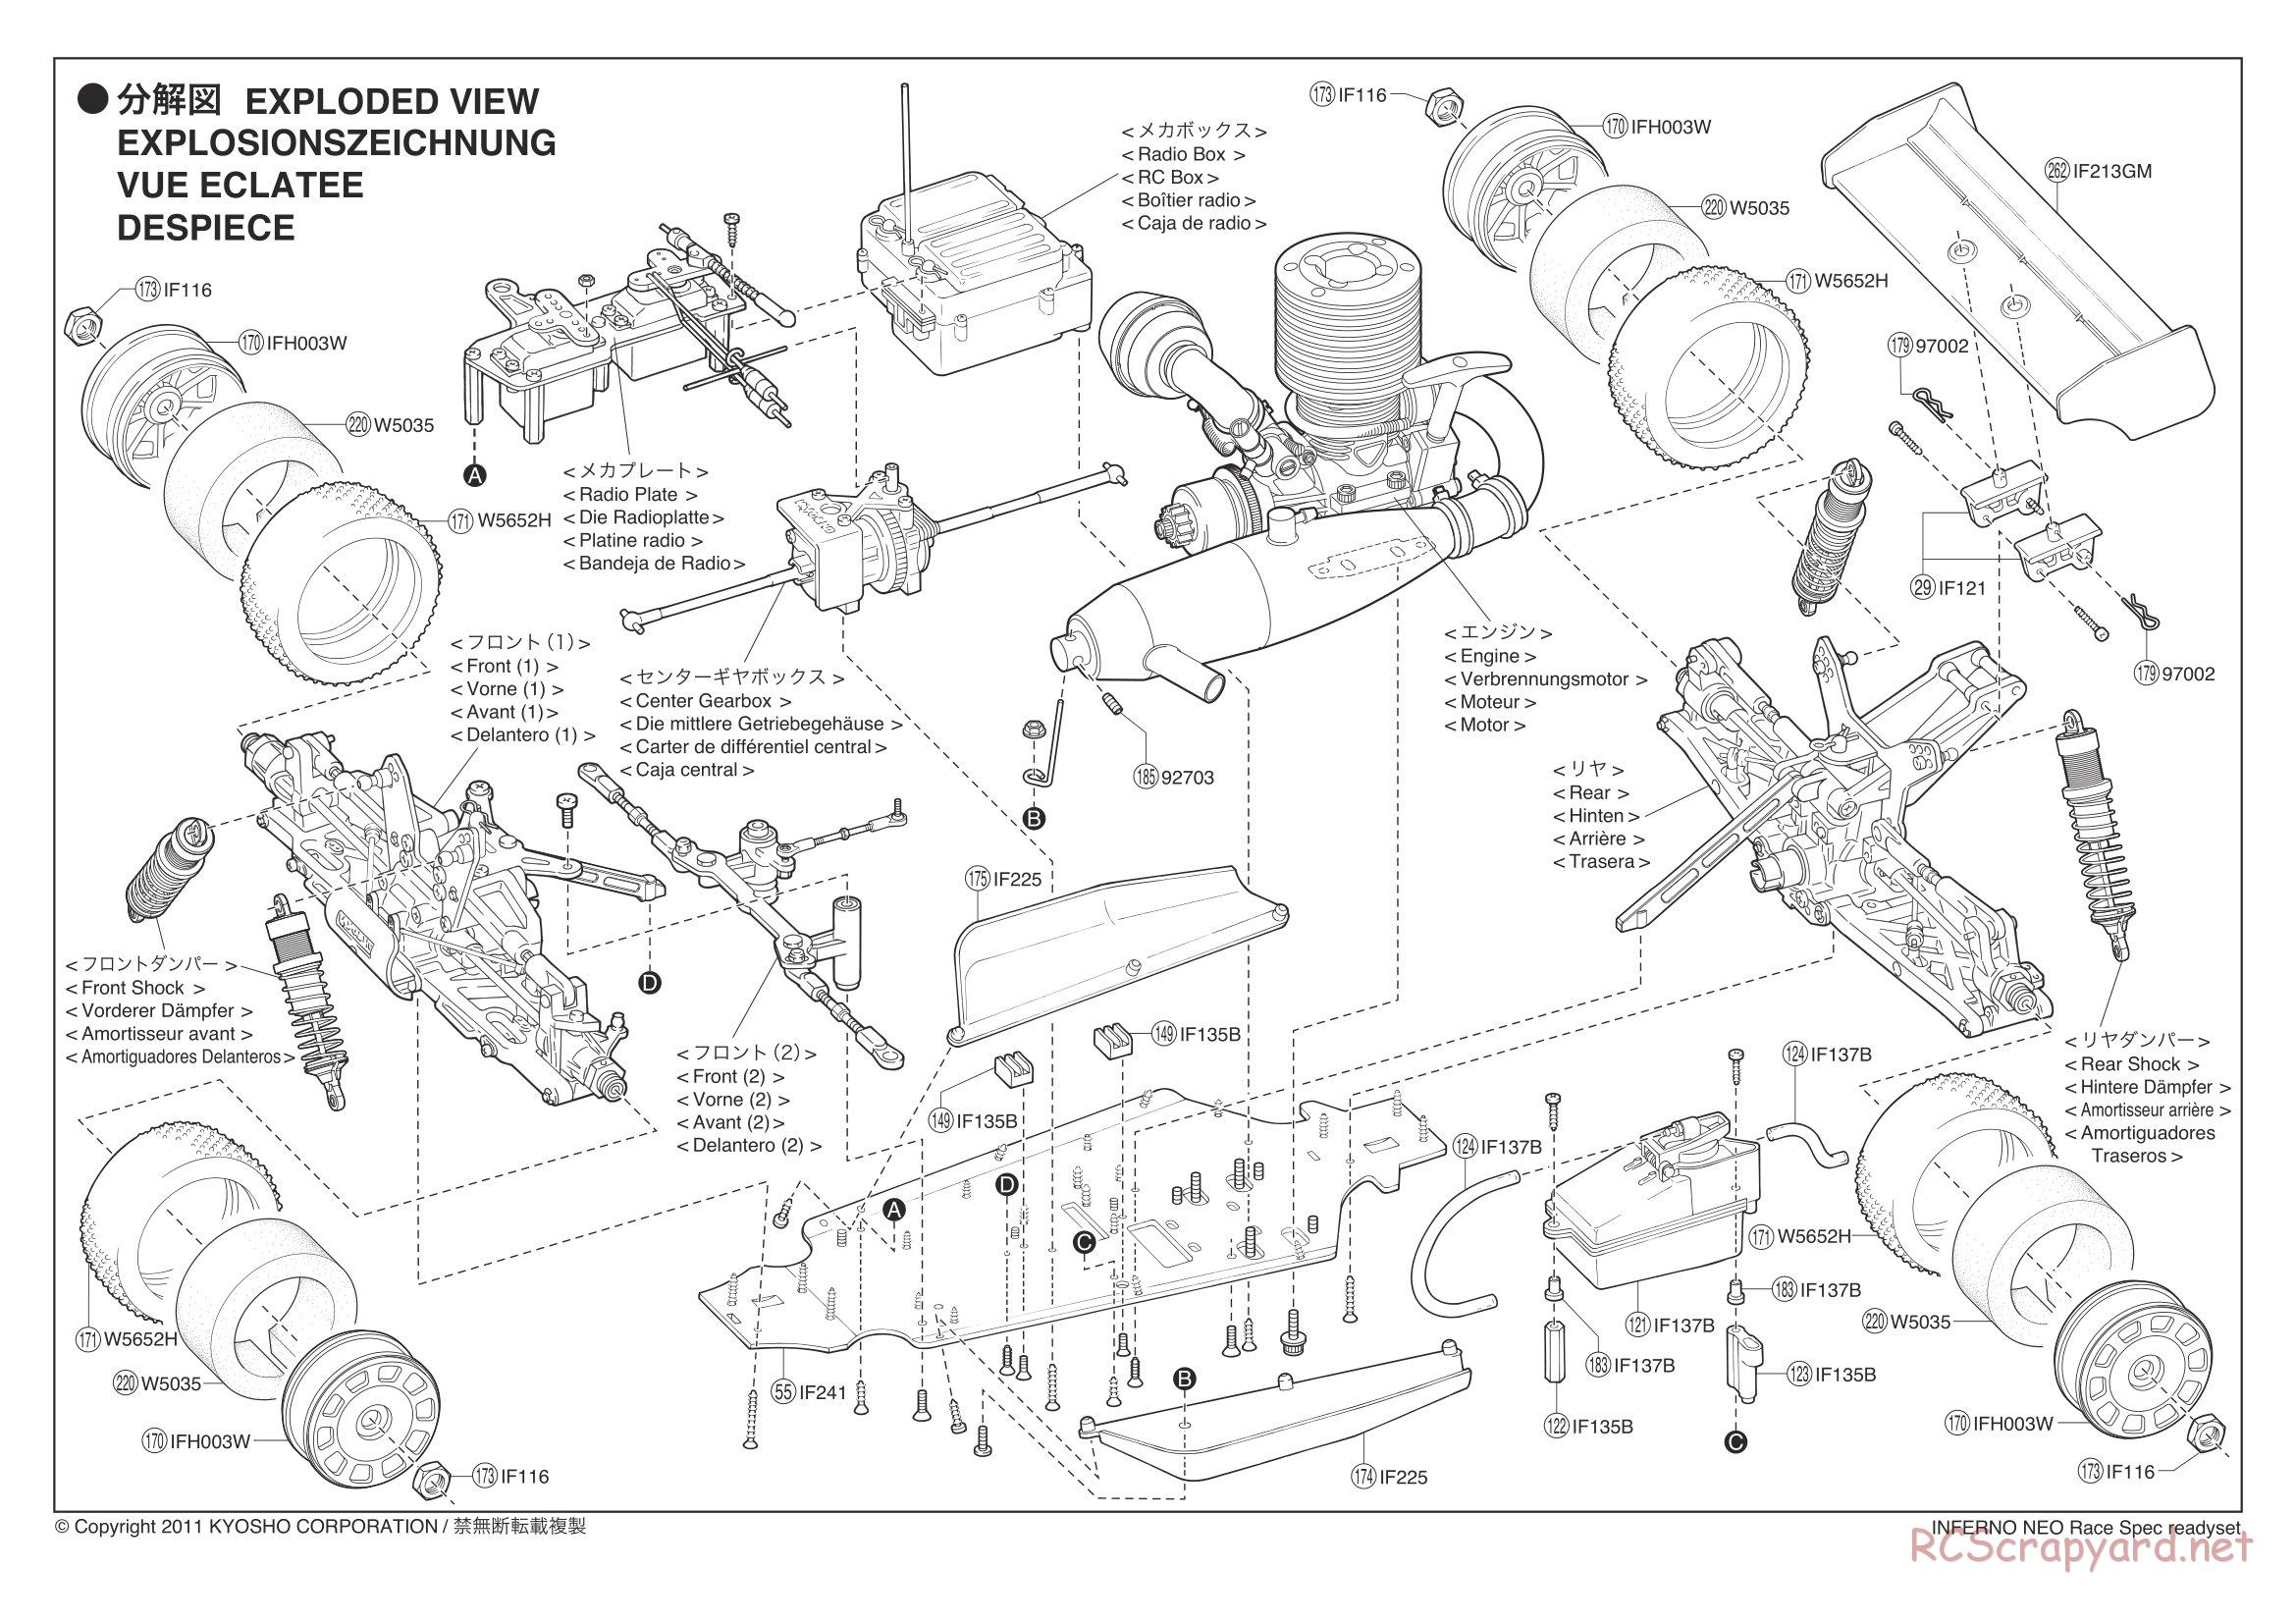 Kyosho - Inferno Neo Race Spec - Exploded Views - Page 1